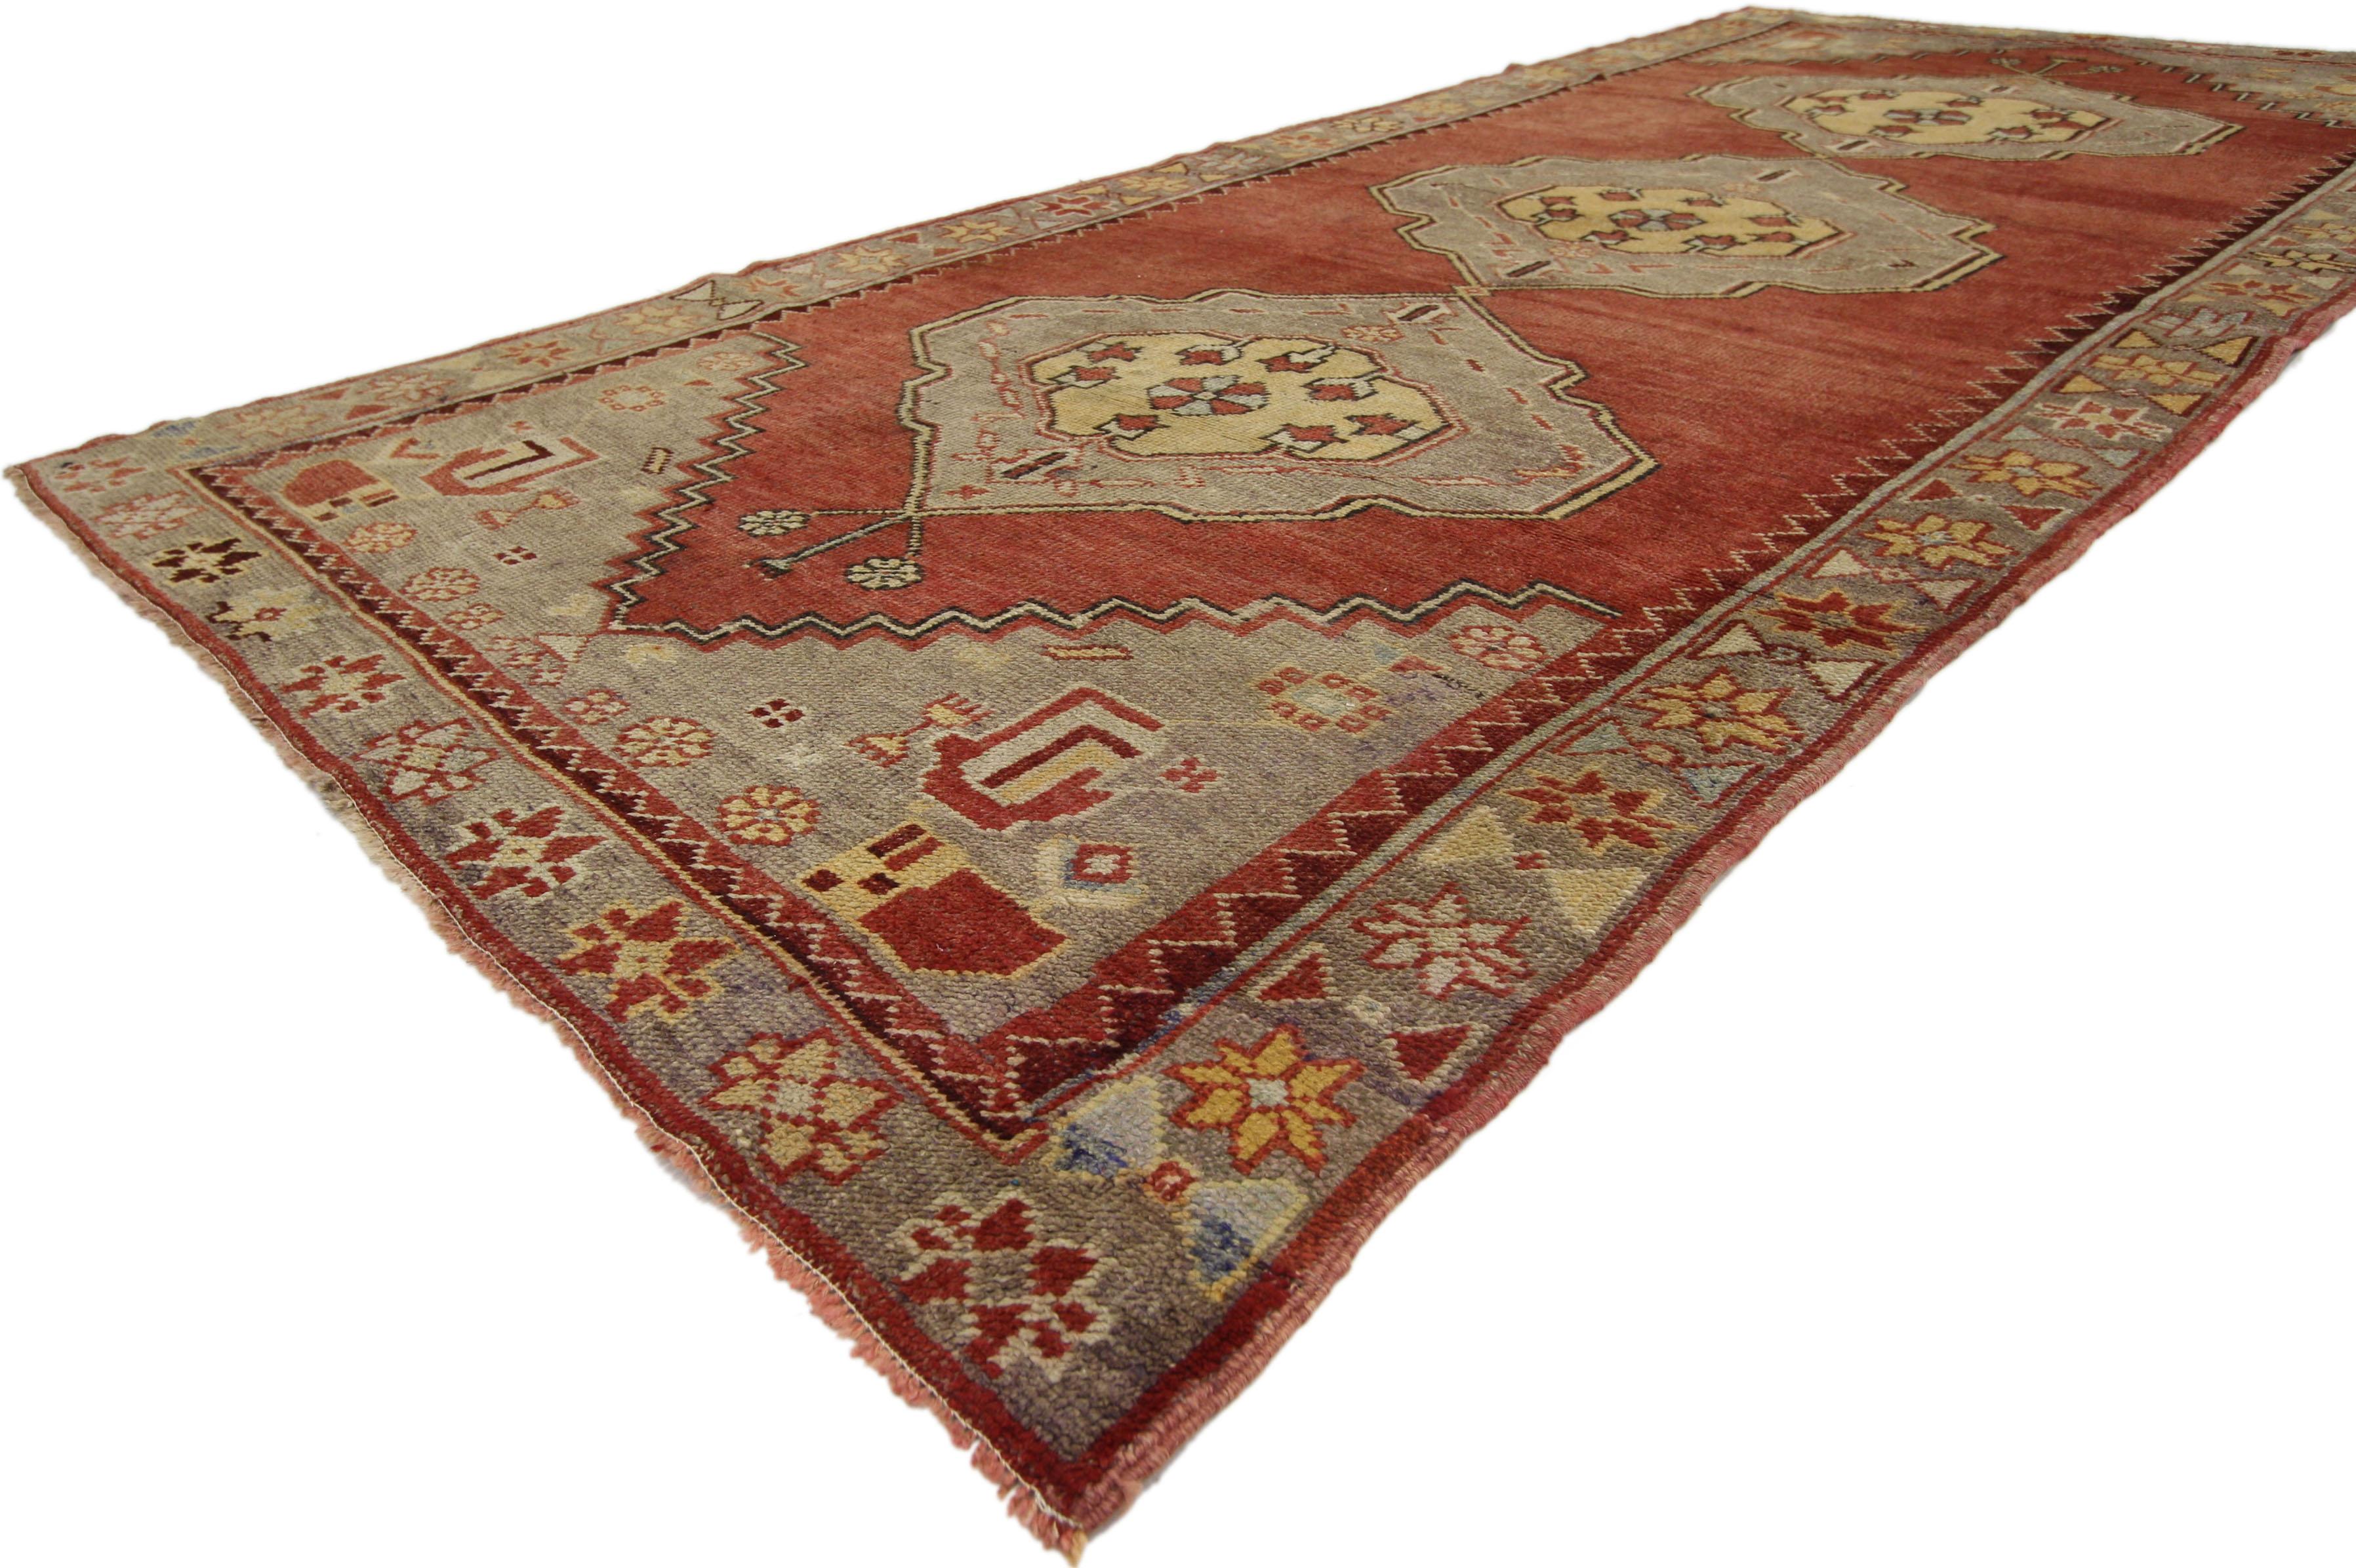 Vintage Turkish Oushak Runner with French Provincial Style, Wide Hallway Runner In Good Condition For Sale In Dallas, TX